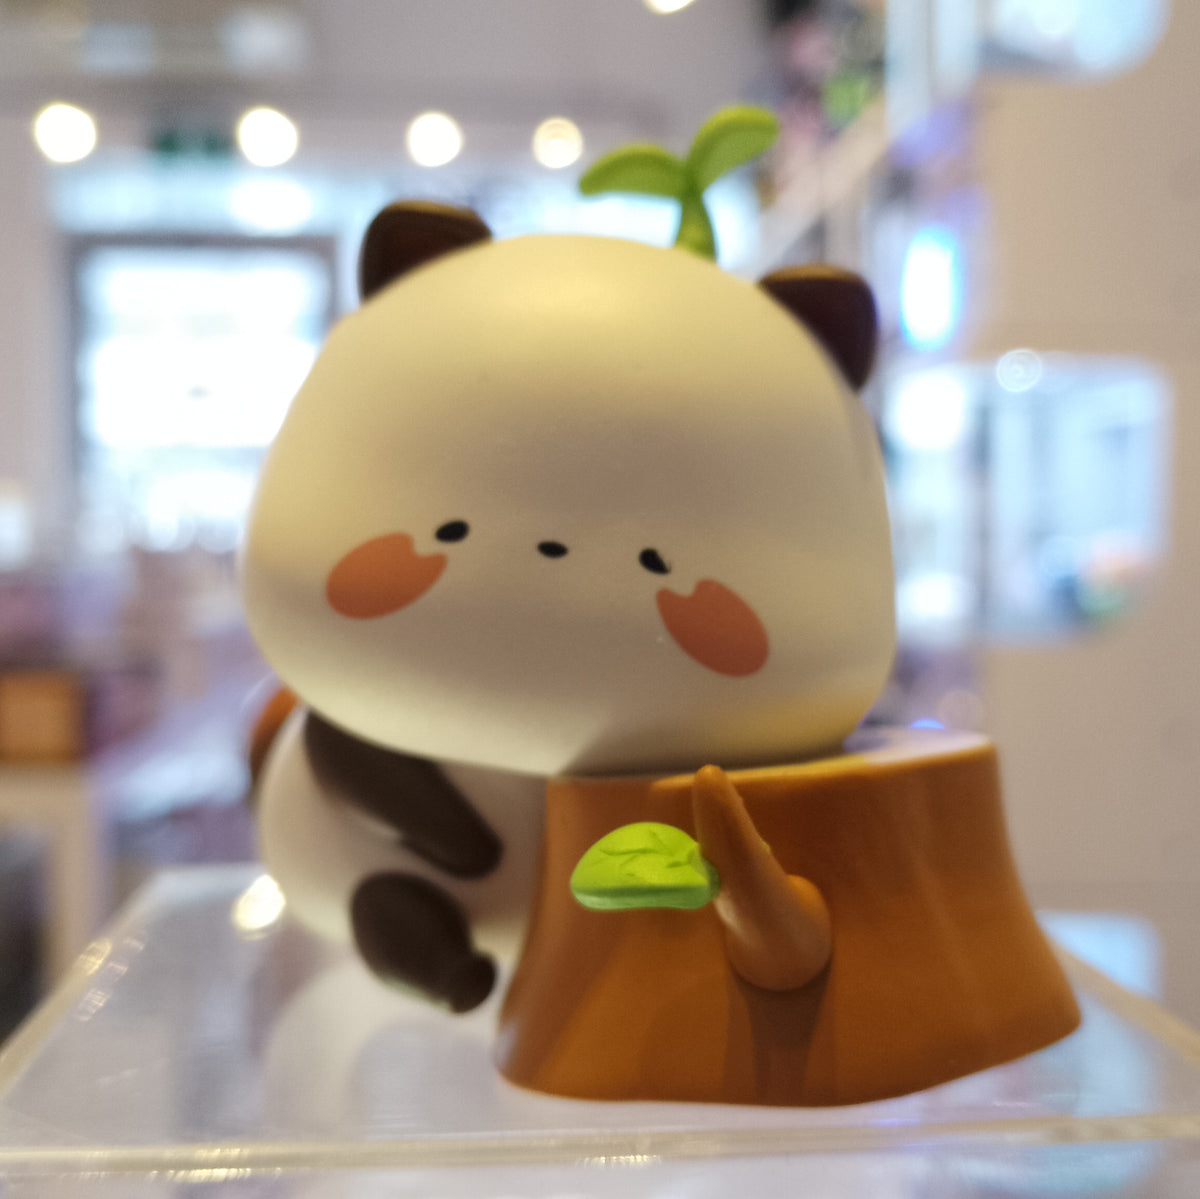 Tree Stump (leaf defect) - Moer Act Cute Raccoon Diary Series by Morethanfun